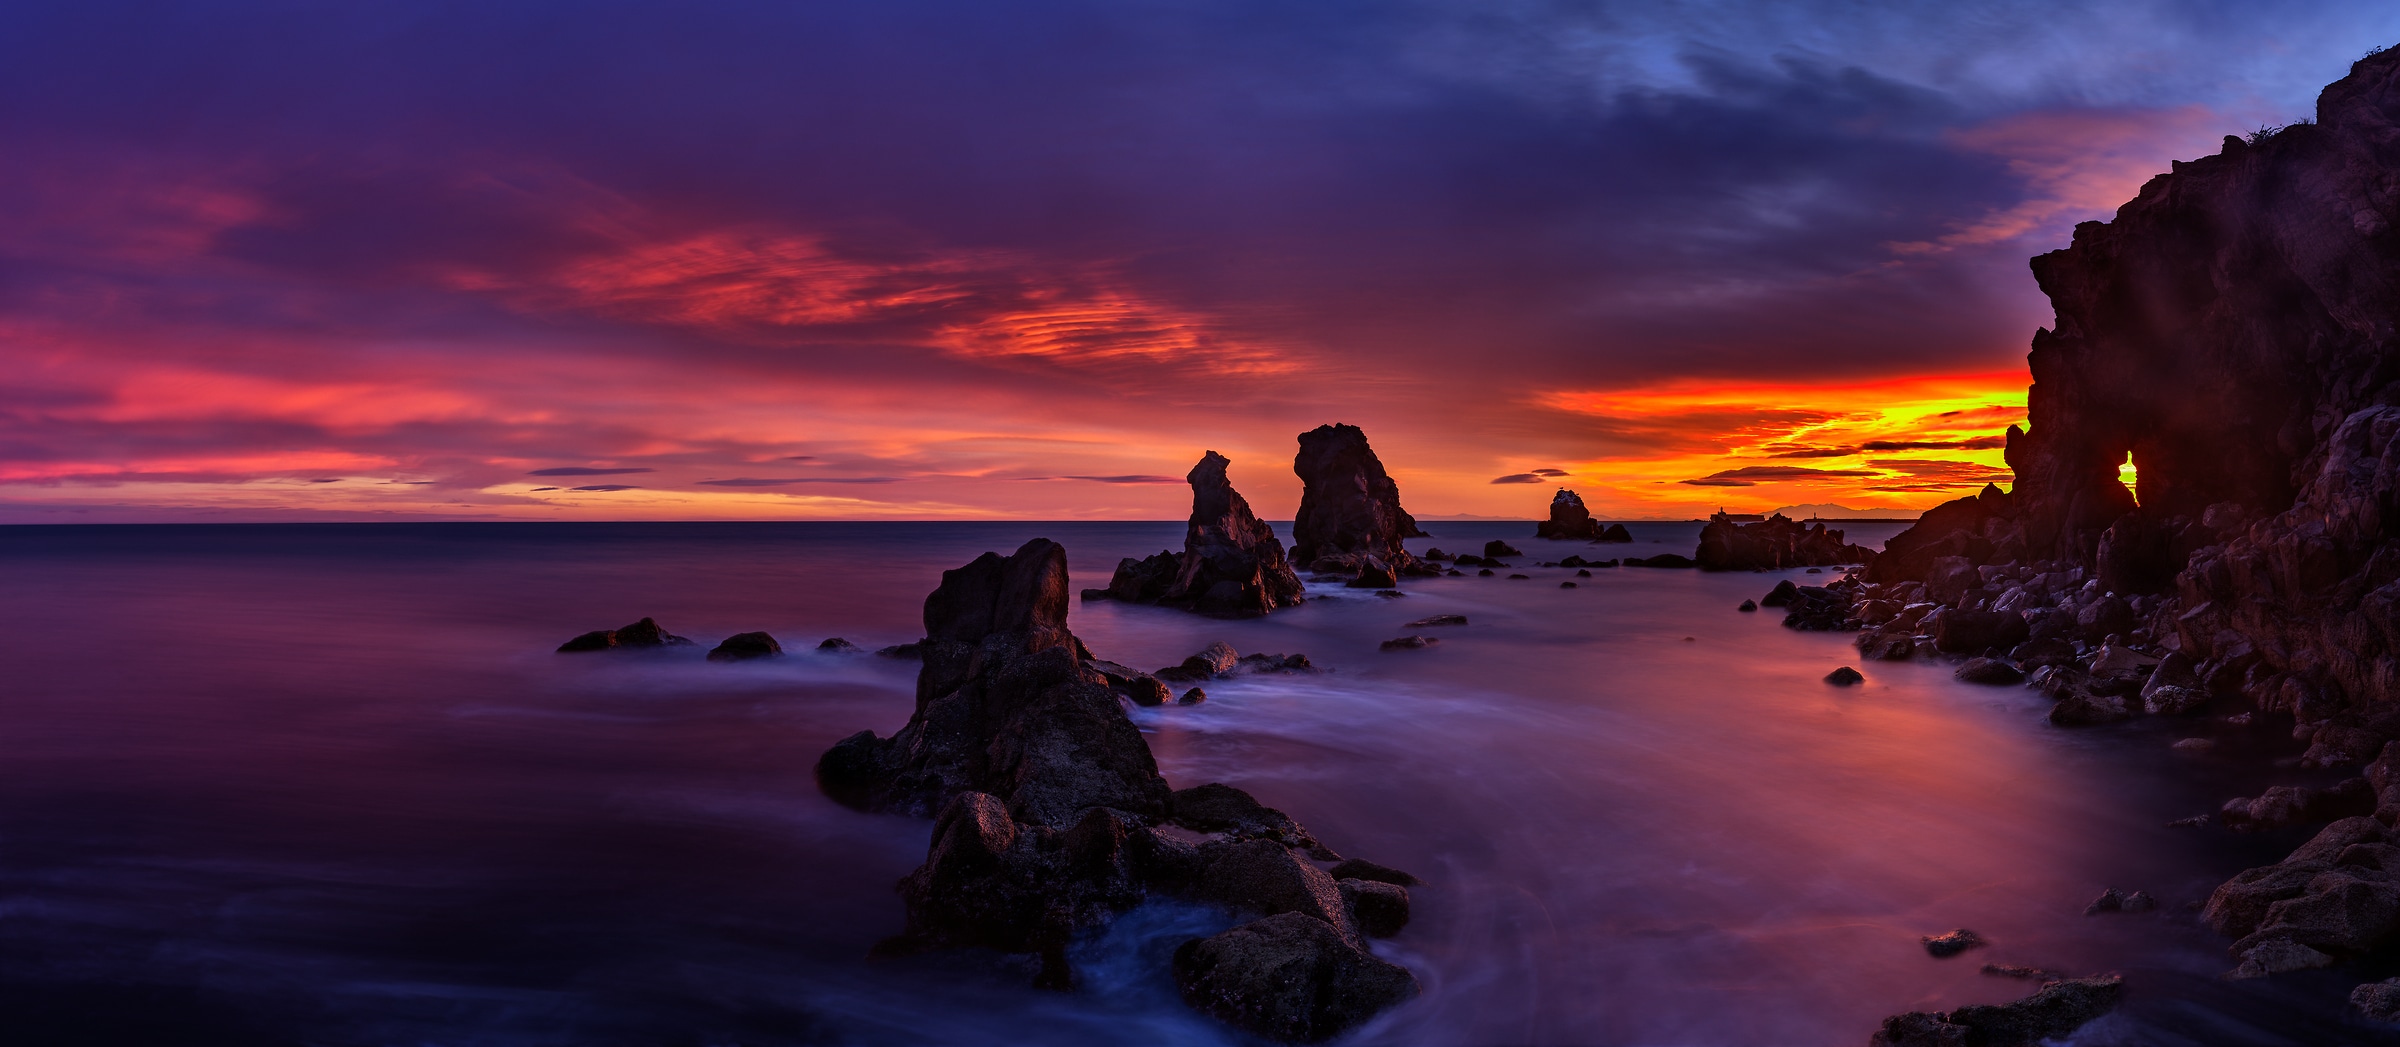 120 megapixels! A very high resolution, large-format VAST photo print of a dark seascape sunset; photograph created by David Meaux in Le Cap d'Agde, Hérault, Occitanie, France